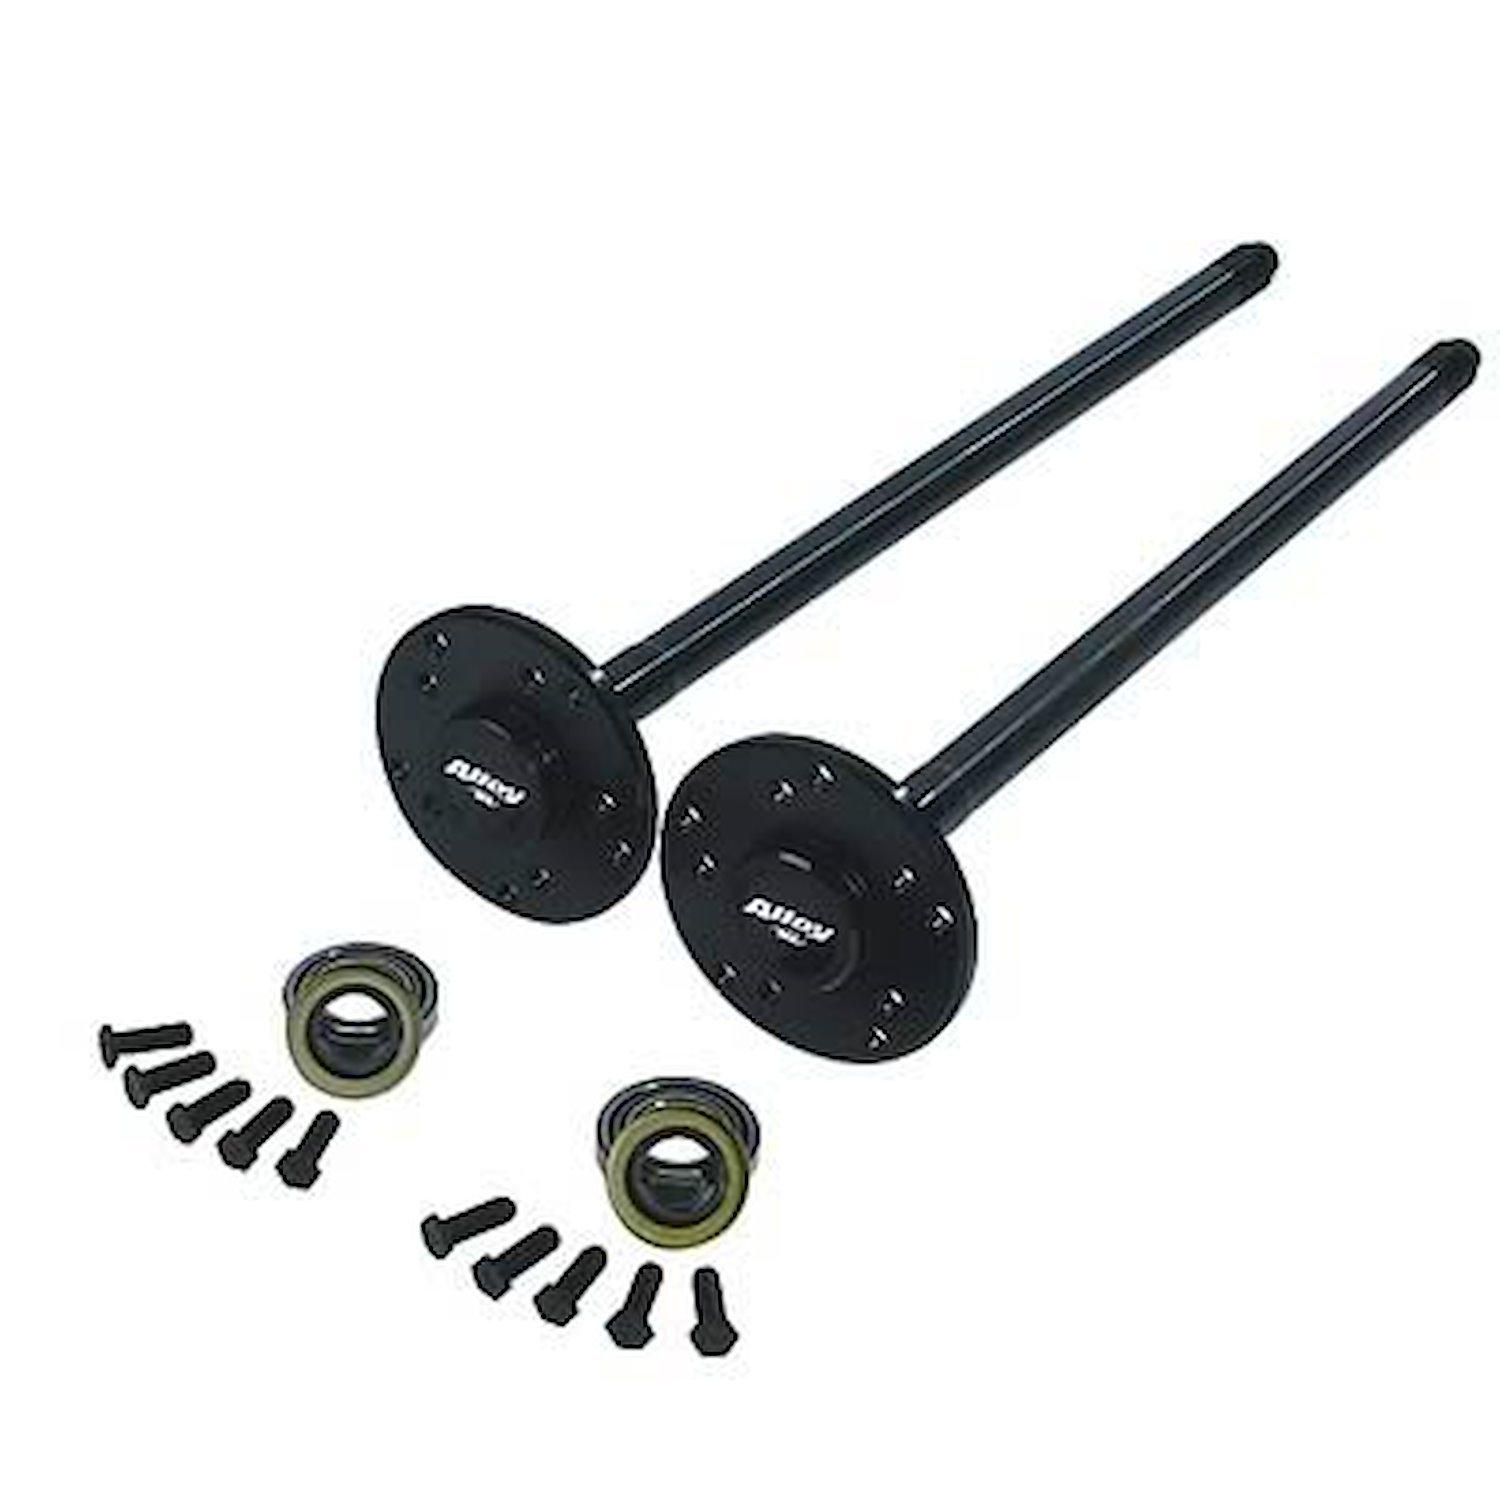 Ford 8.8" Performance Rear Axle Kit 1979-93 Mustang 4-lug